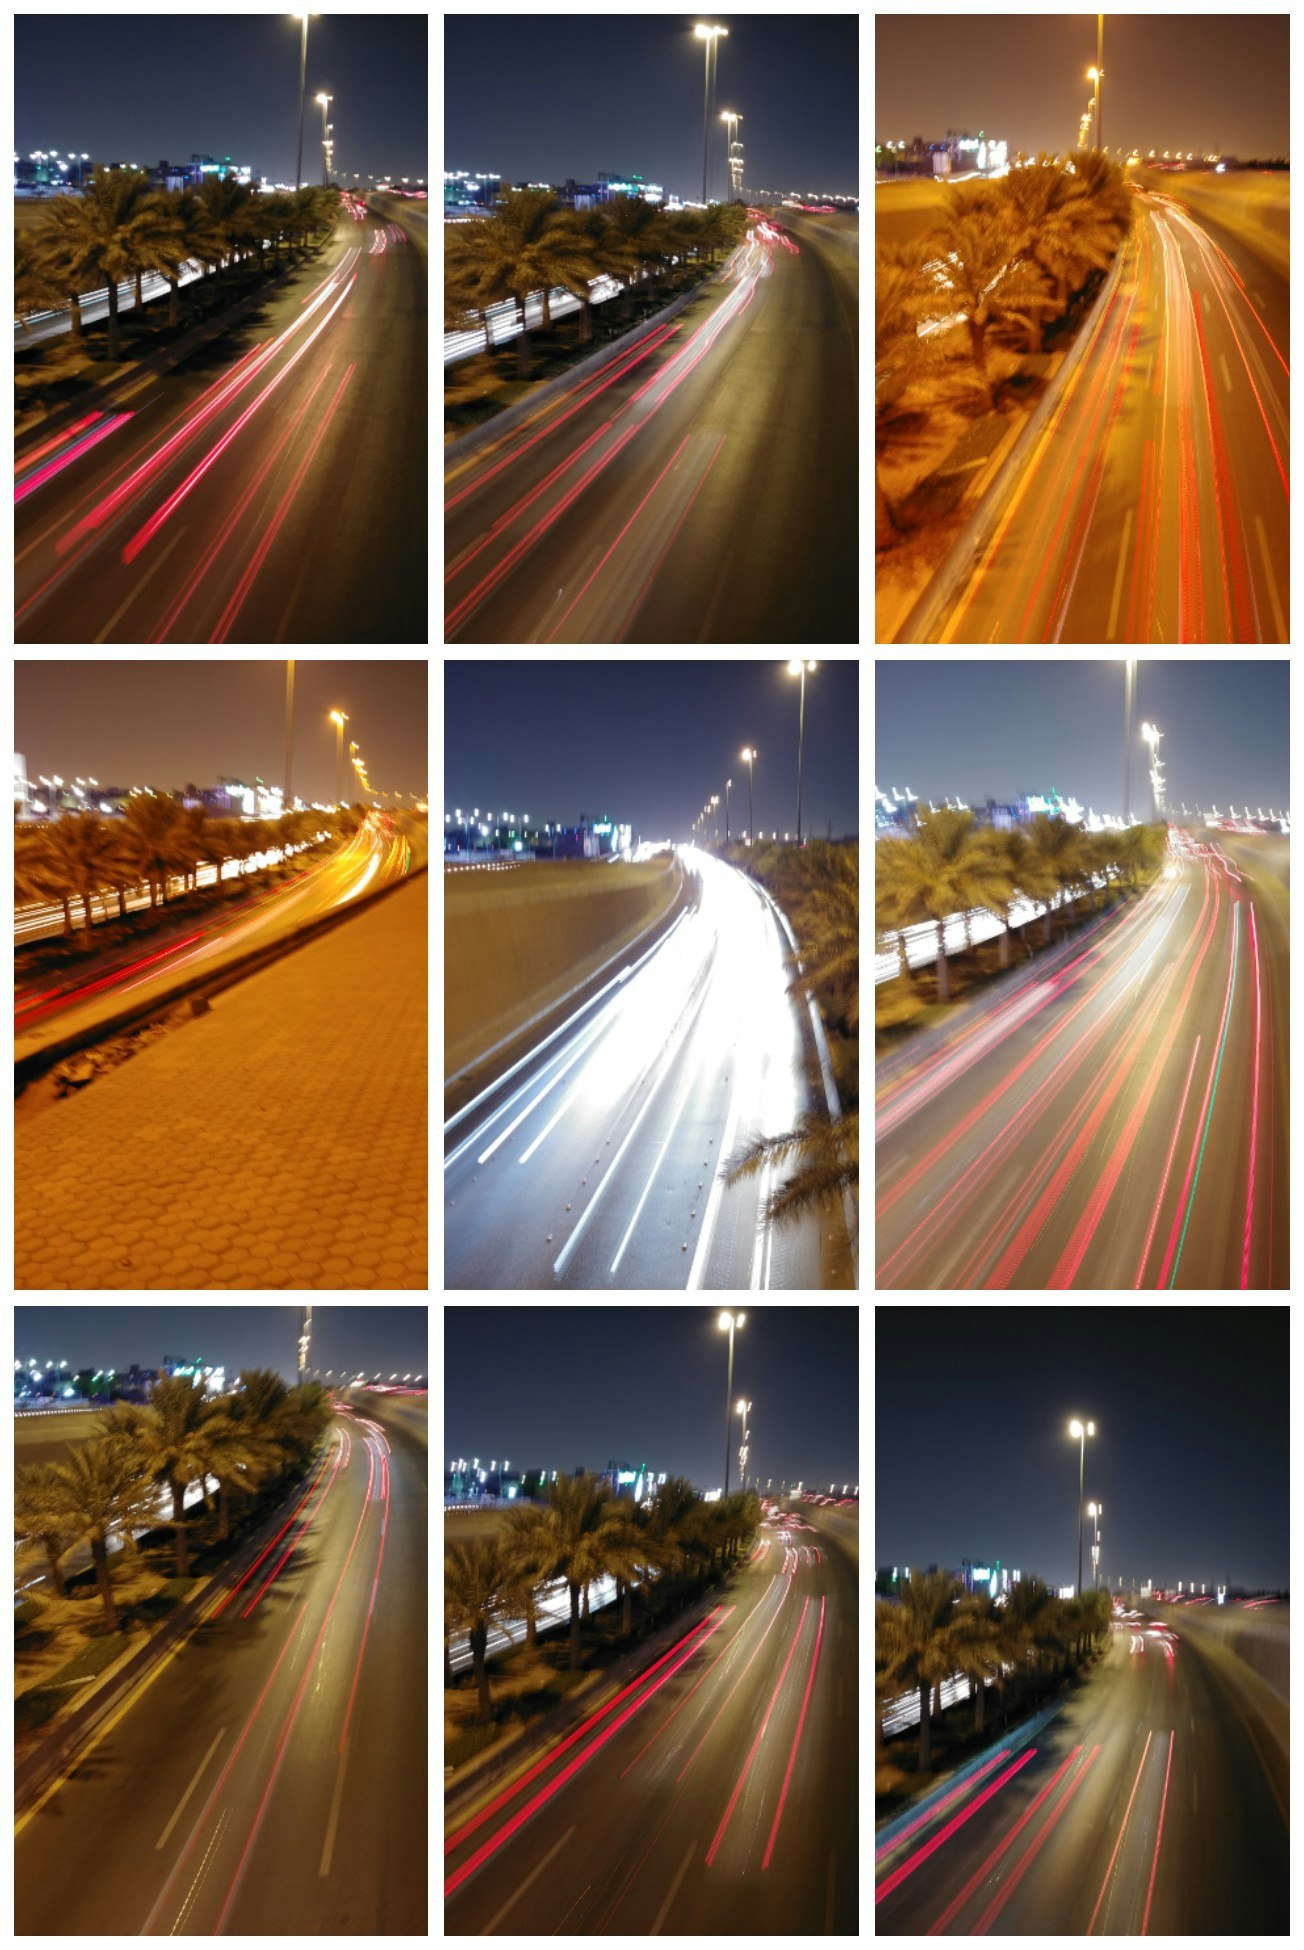 Slow shutter in the streets of Riyadh